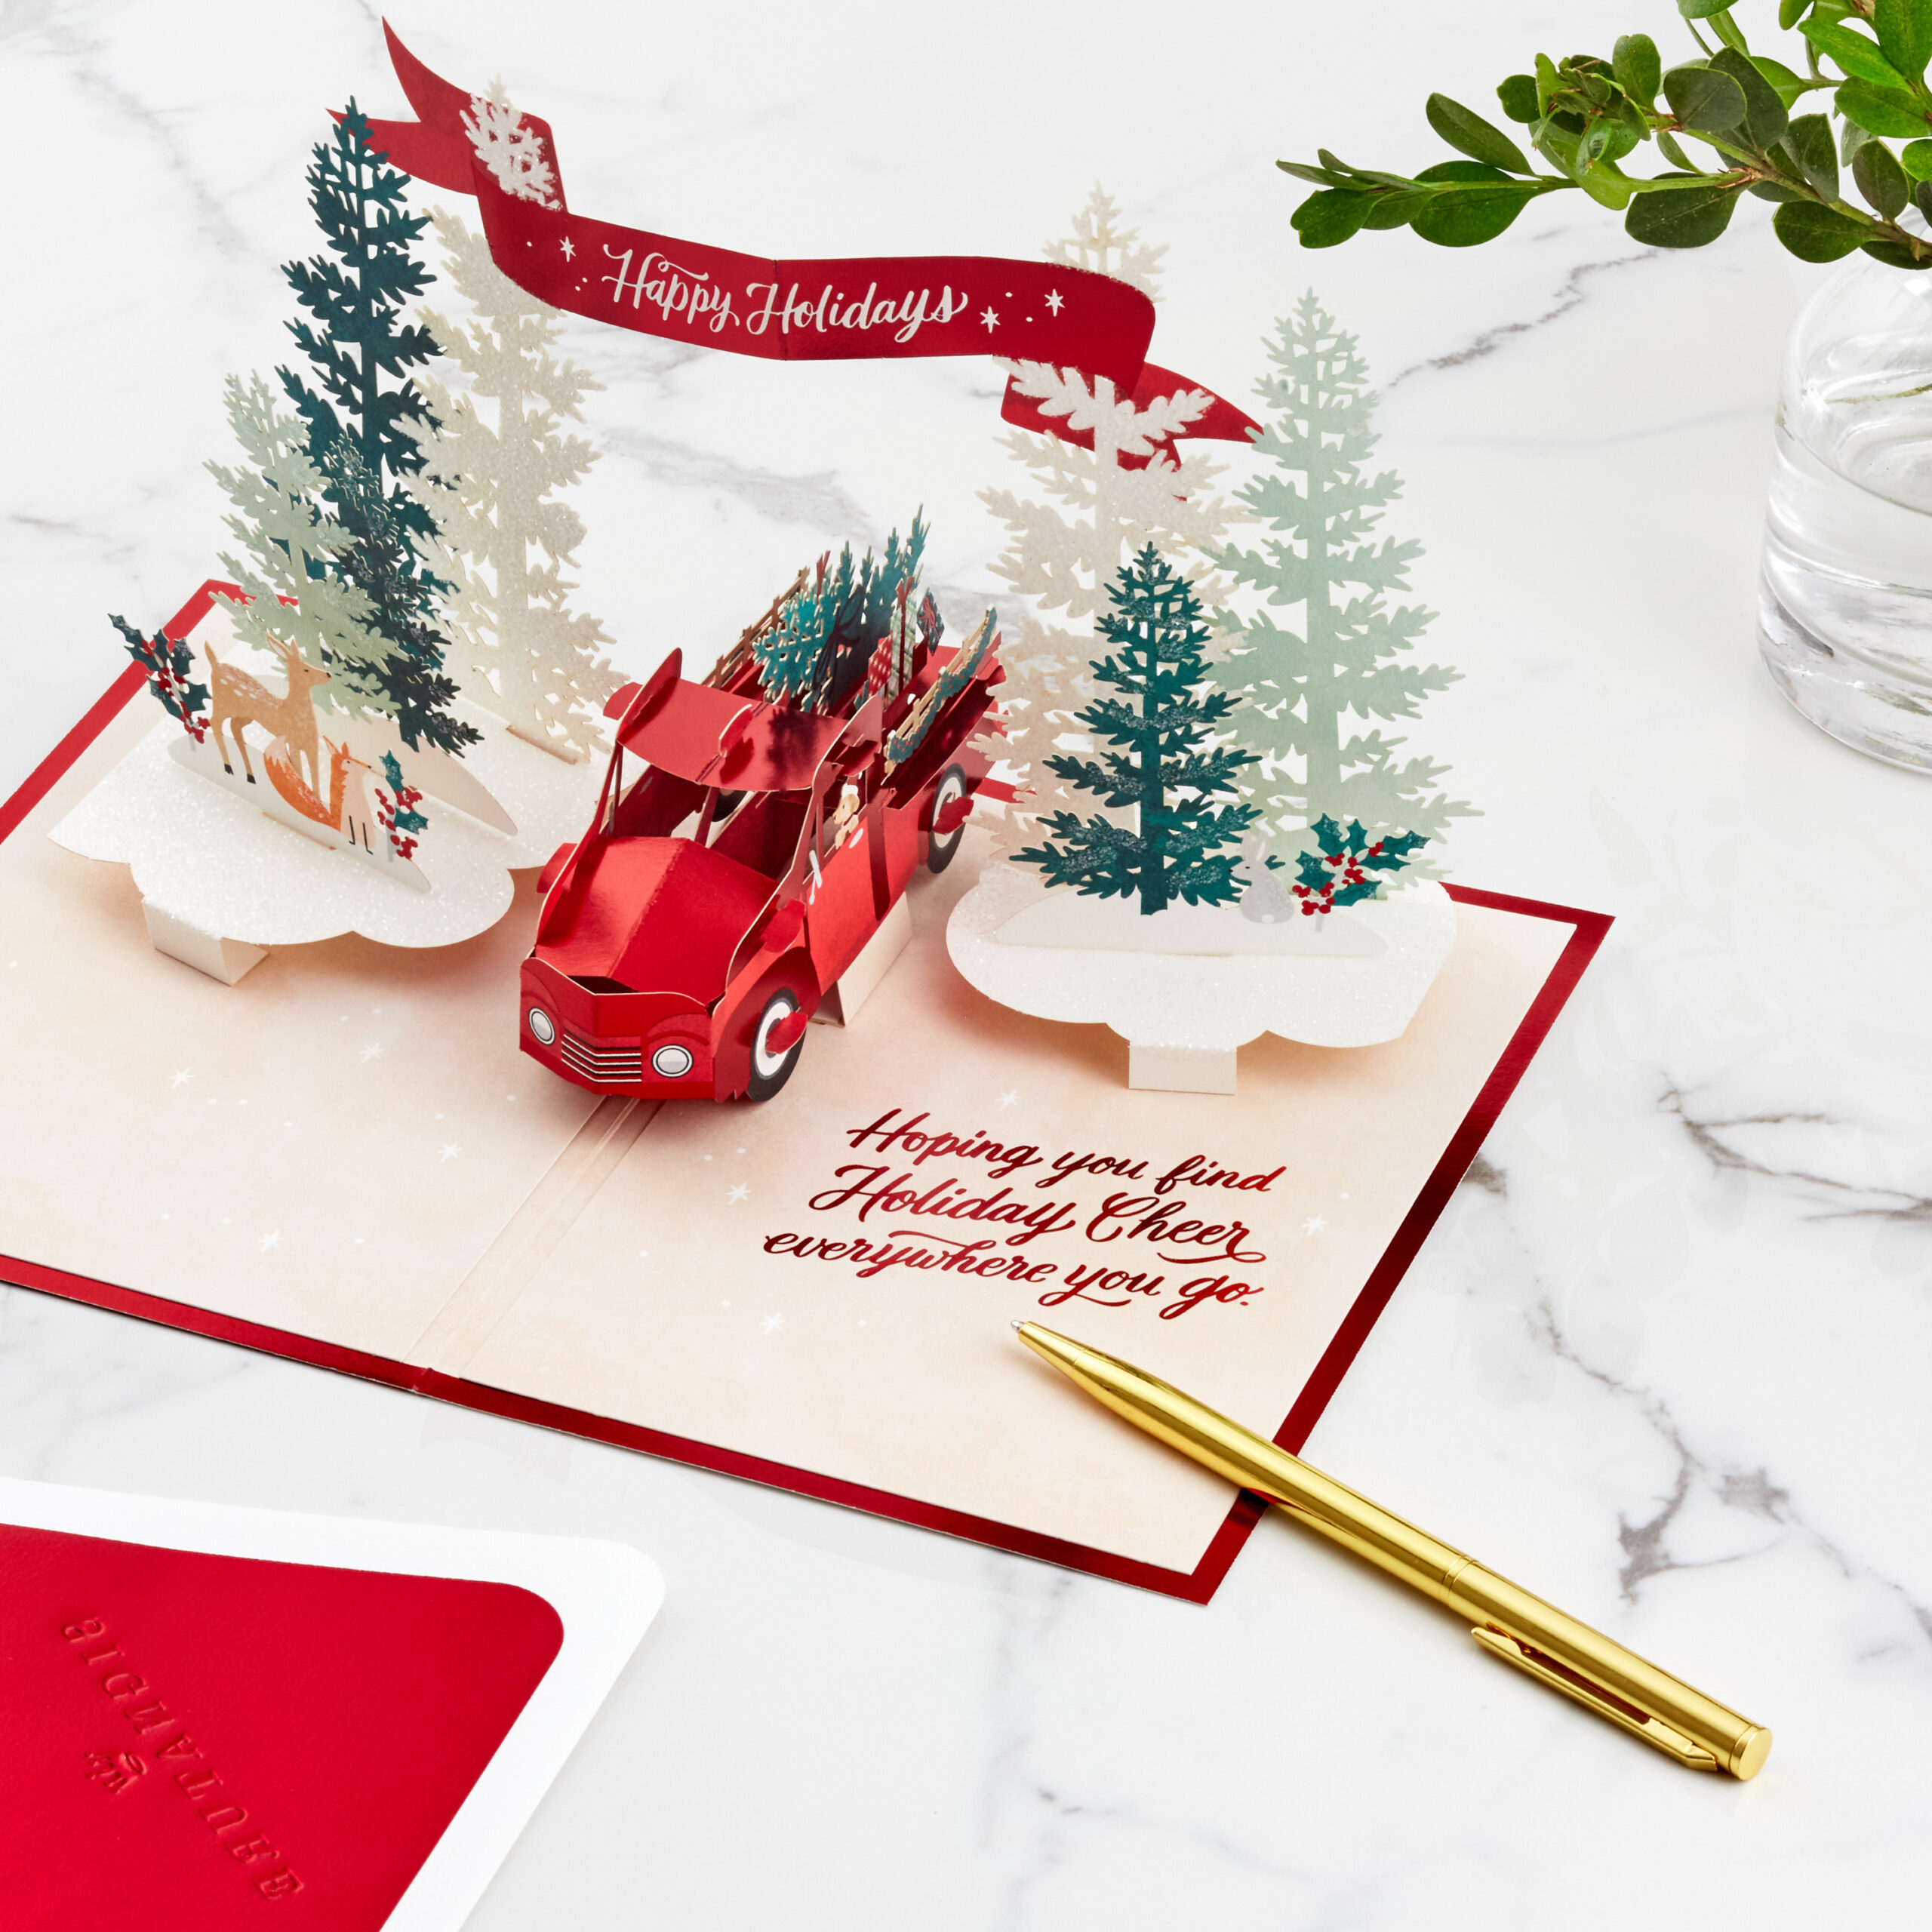 Hallmark 3D holiday cheer card with pop-up trees, animals, and a vintage red truck